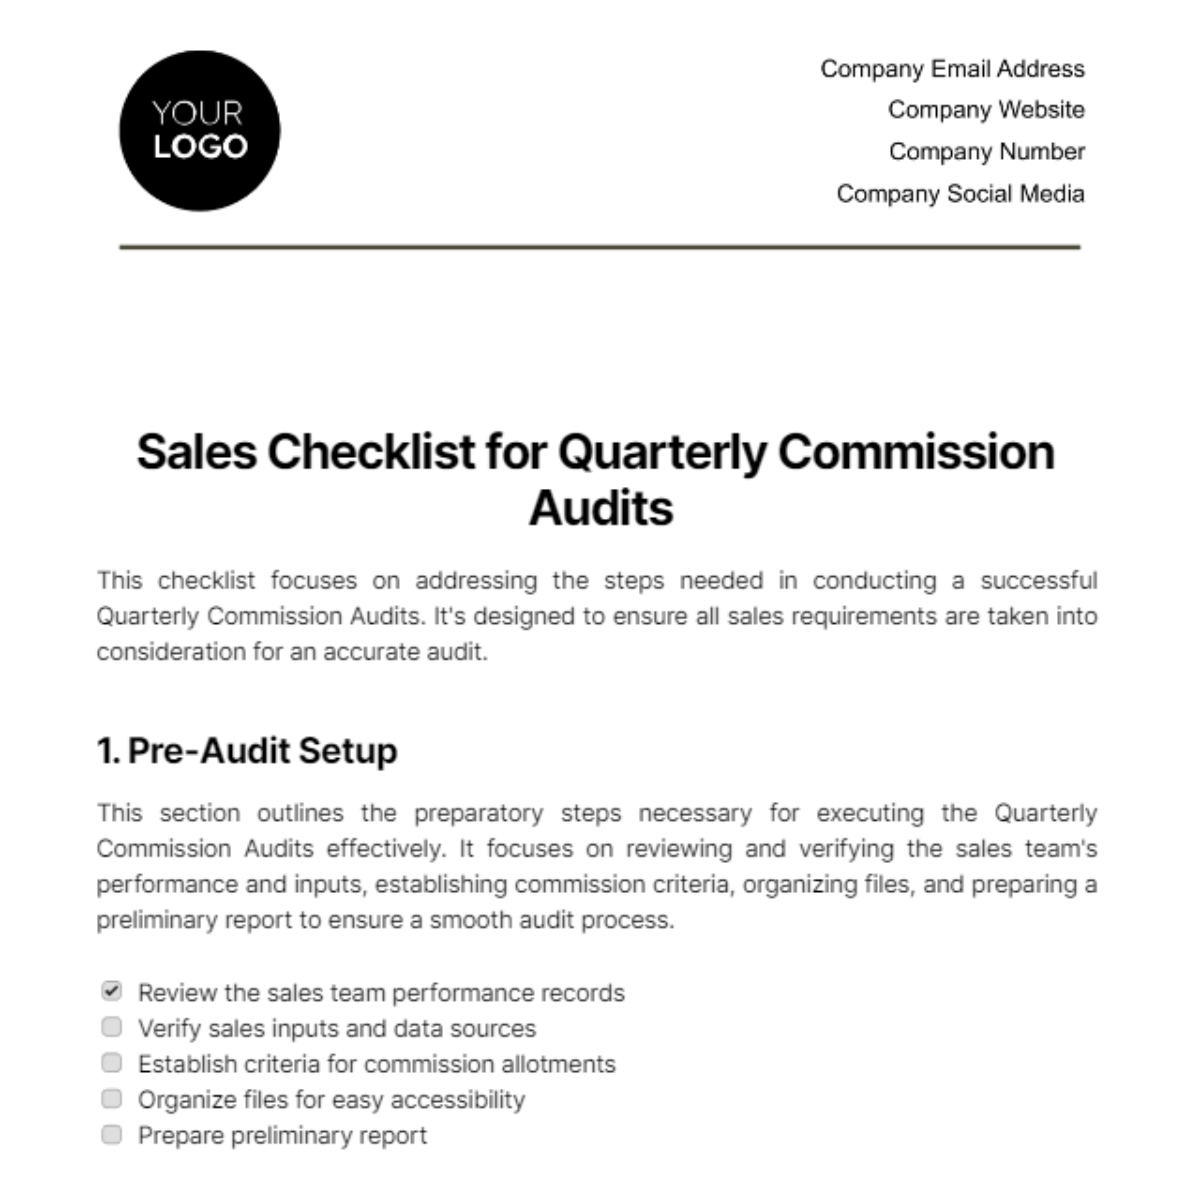 Sales Checklist for Quarterly Commission Audits Template